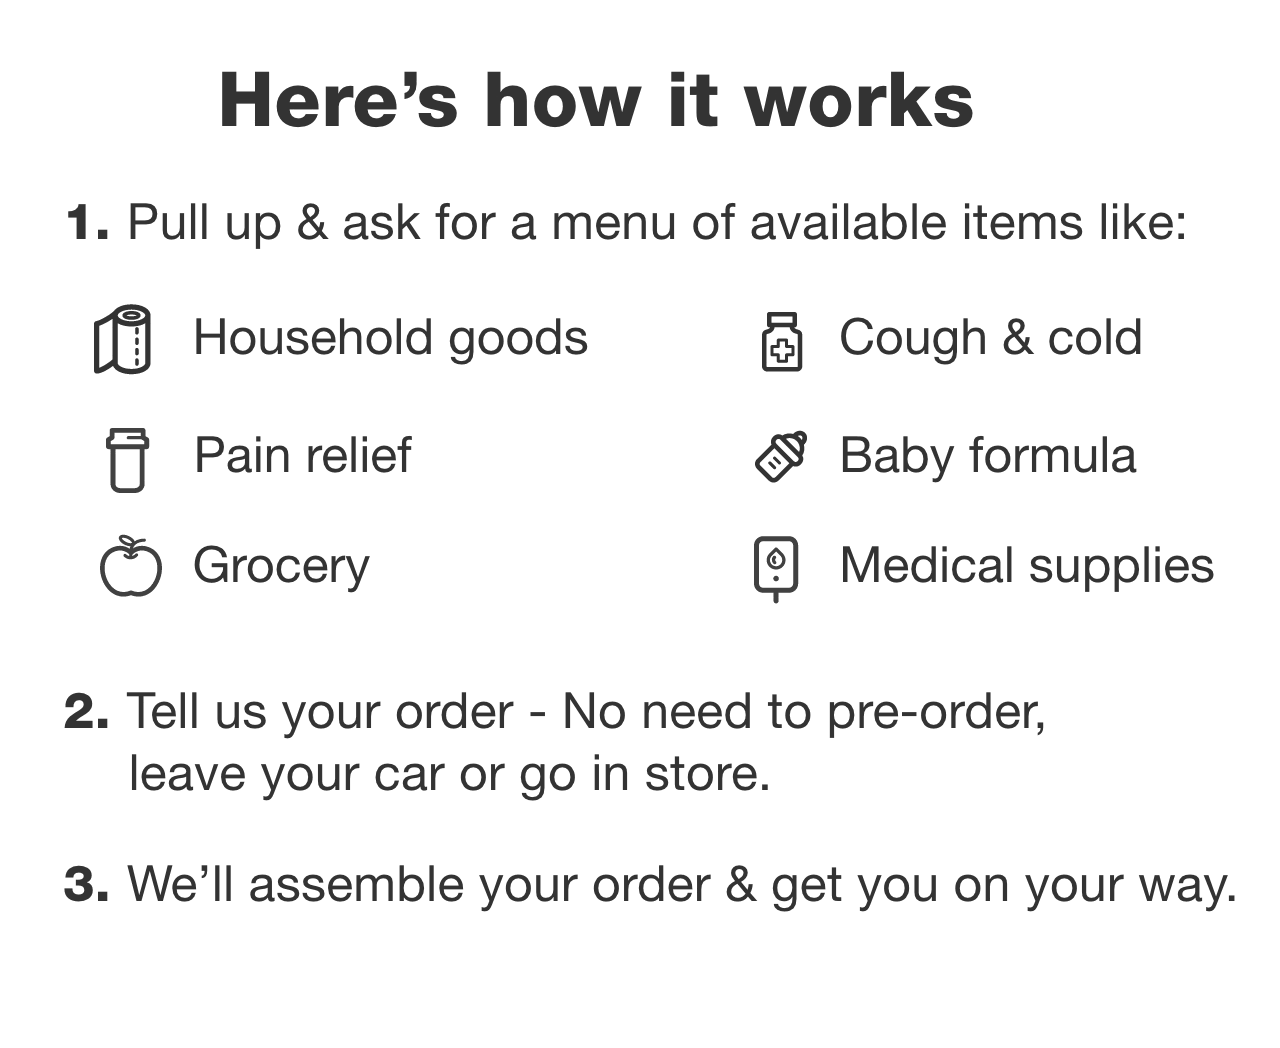 Here's how it works. 1. Pull up & ask for a menu of available items like: Household goods, Cough & cold, Pain relief, Baby formula, Grocery, Medical supplies. 2. Tell us your order - No need to pre-order, leave your car or go in store. 3. We'll assemble your order & get you on your way.